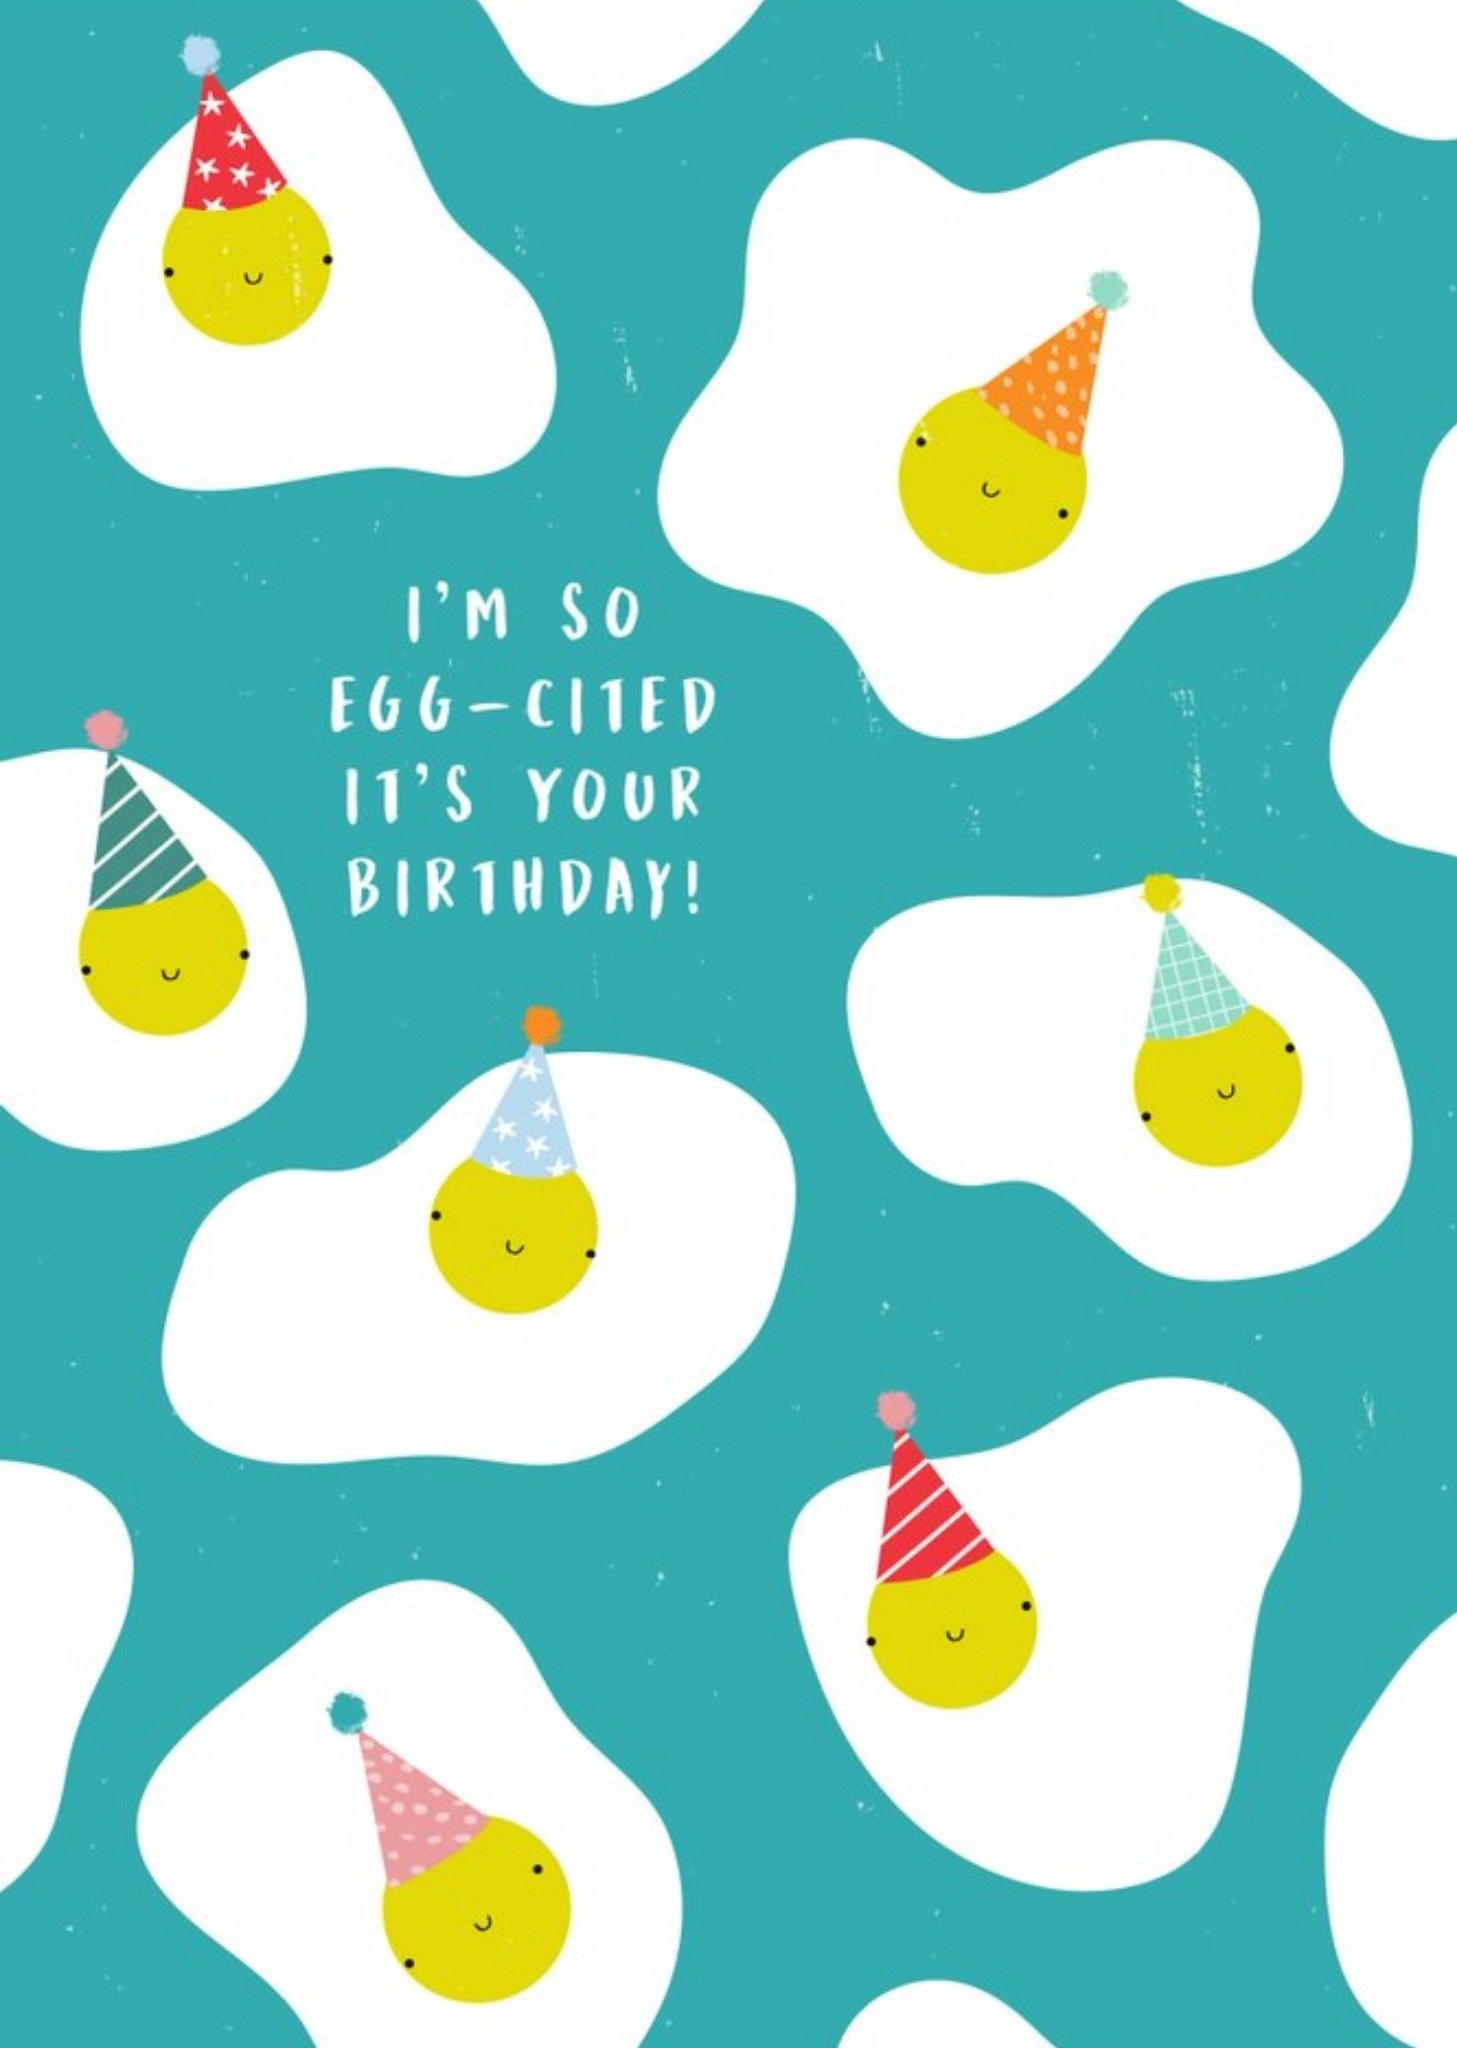 Moonpig Cute Illustrated Egg-Cited It's Your Birthday Card Ecard